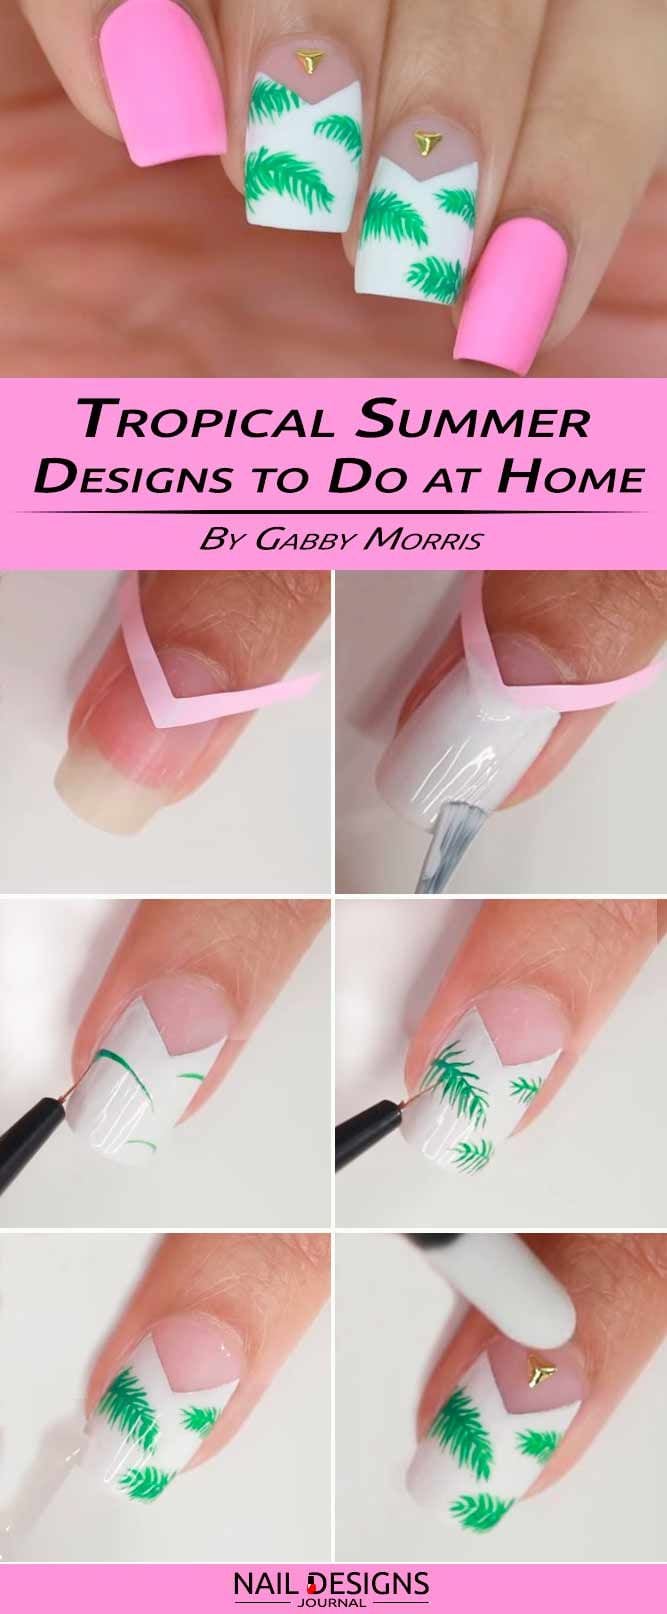 [ad_1]

How to do Nail Designs at Home? ★ See more: naildesignsjourna… #nails
Source by nonja1991
[ad_2]
			
			…